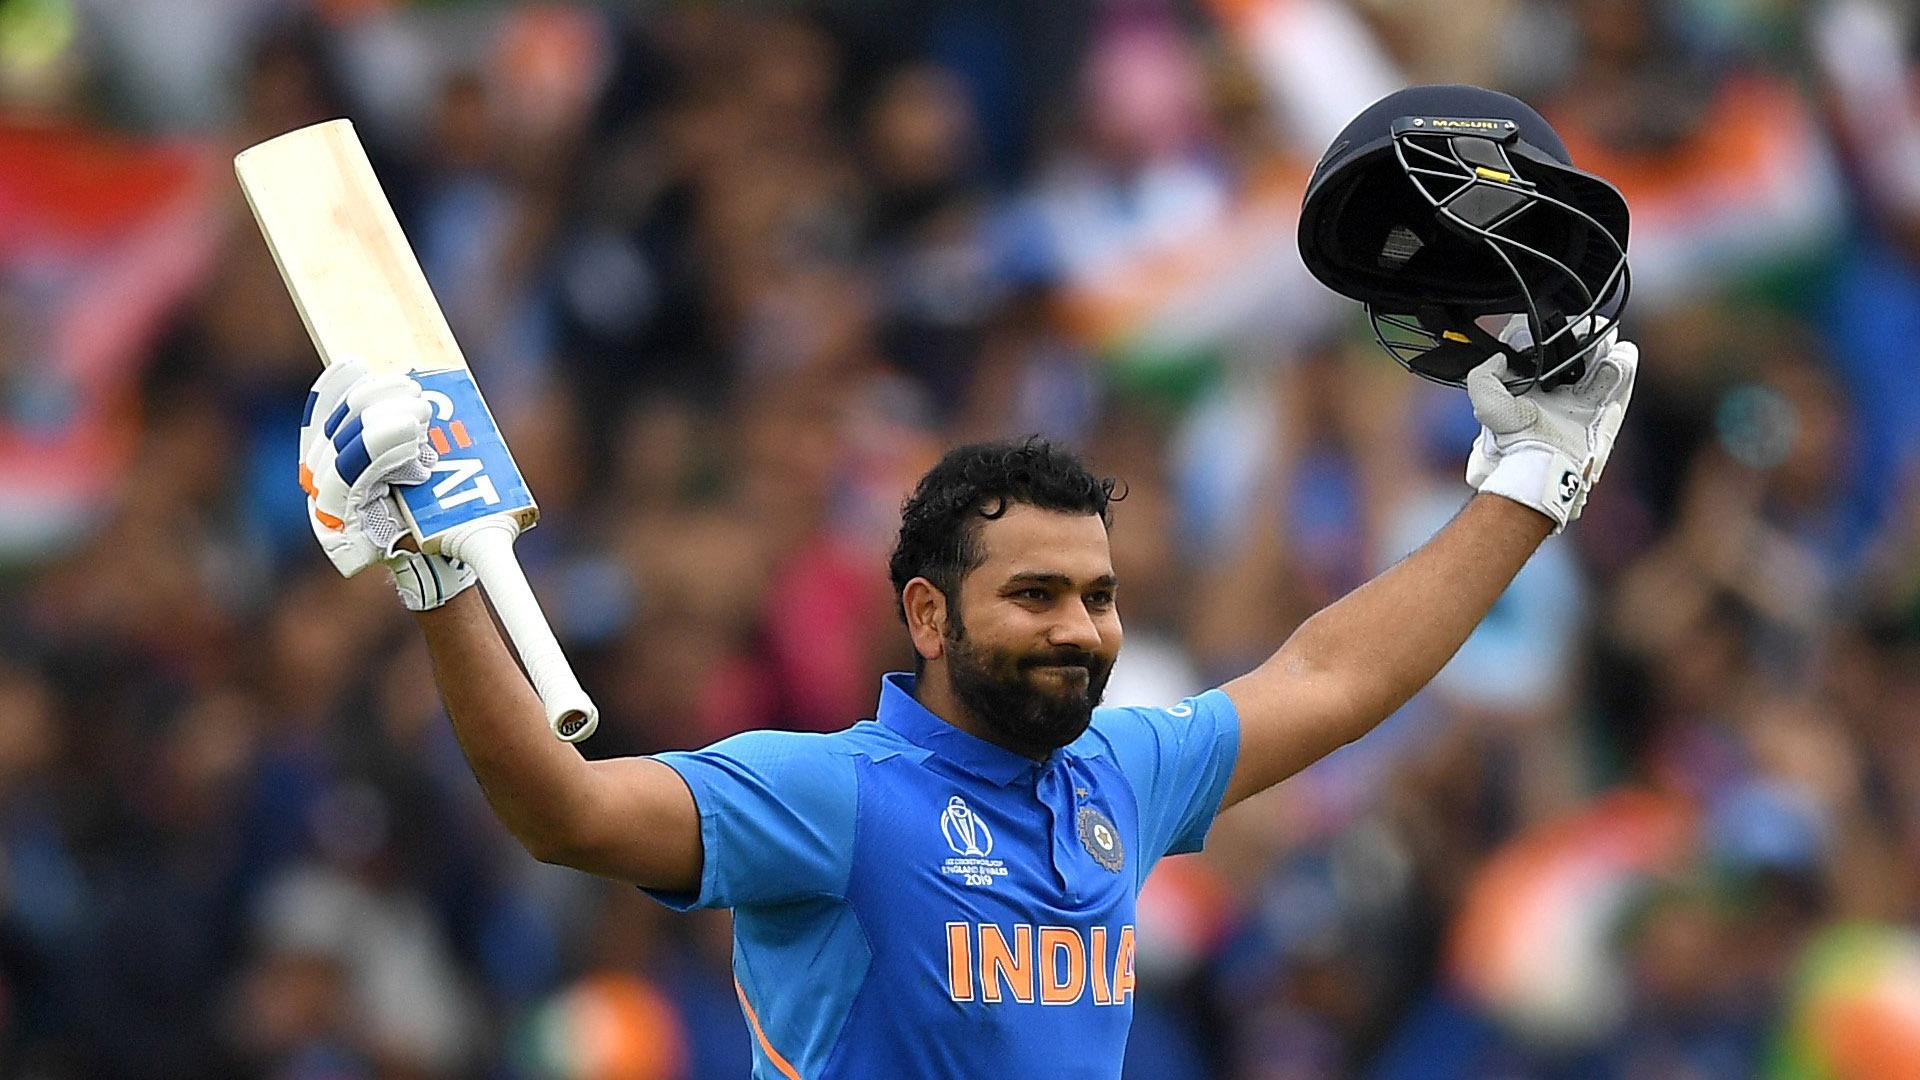 Rohit Sharma was named ODI Cricketer of the Year for 2019.